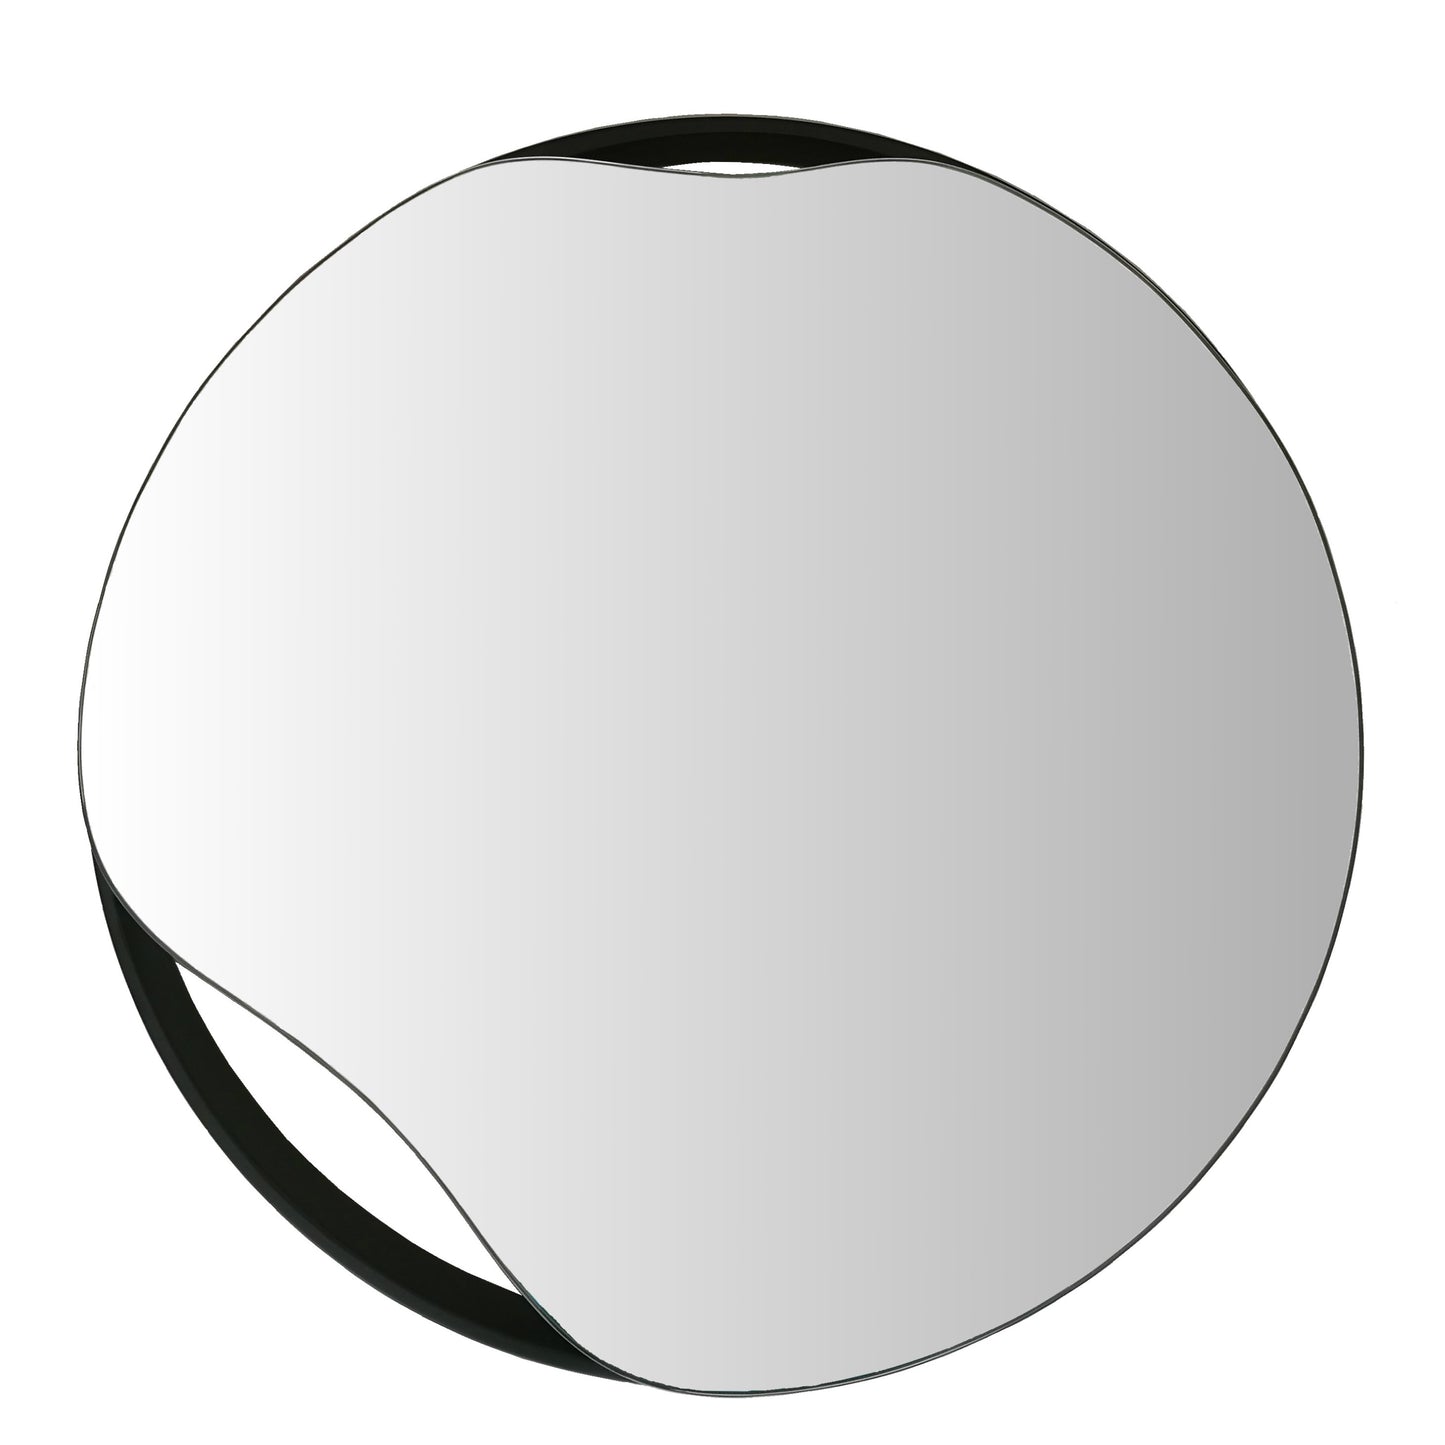 Assymetric wall mirror PUDDLE